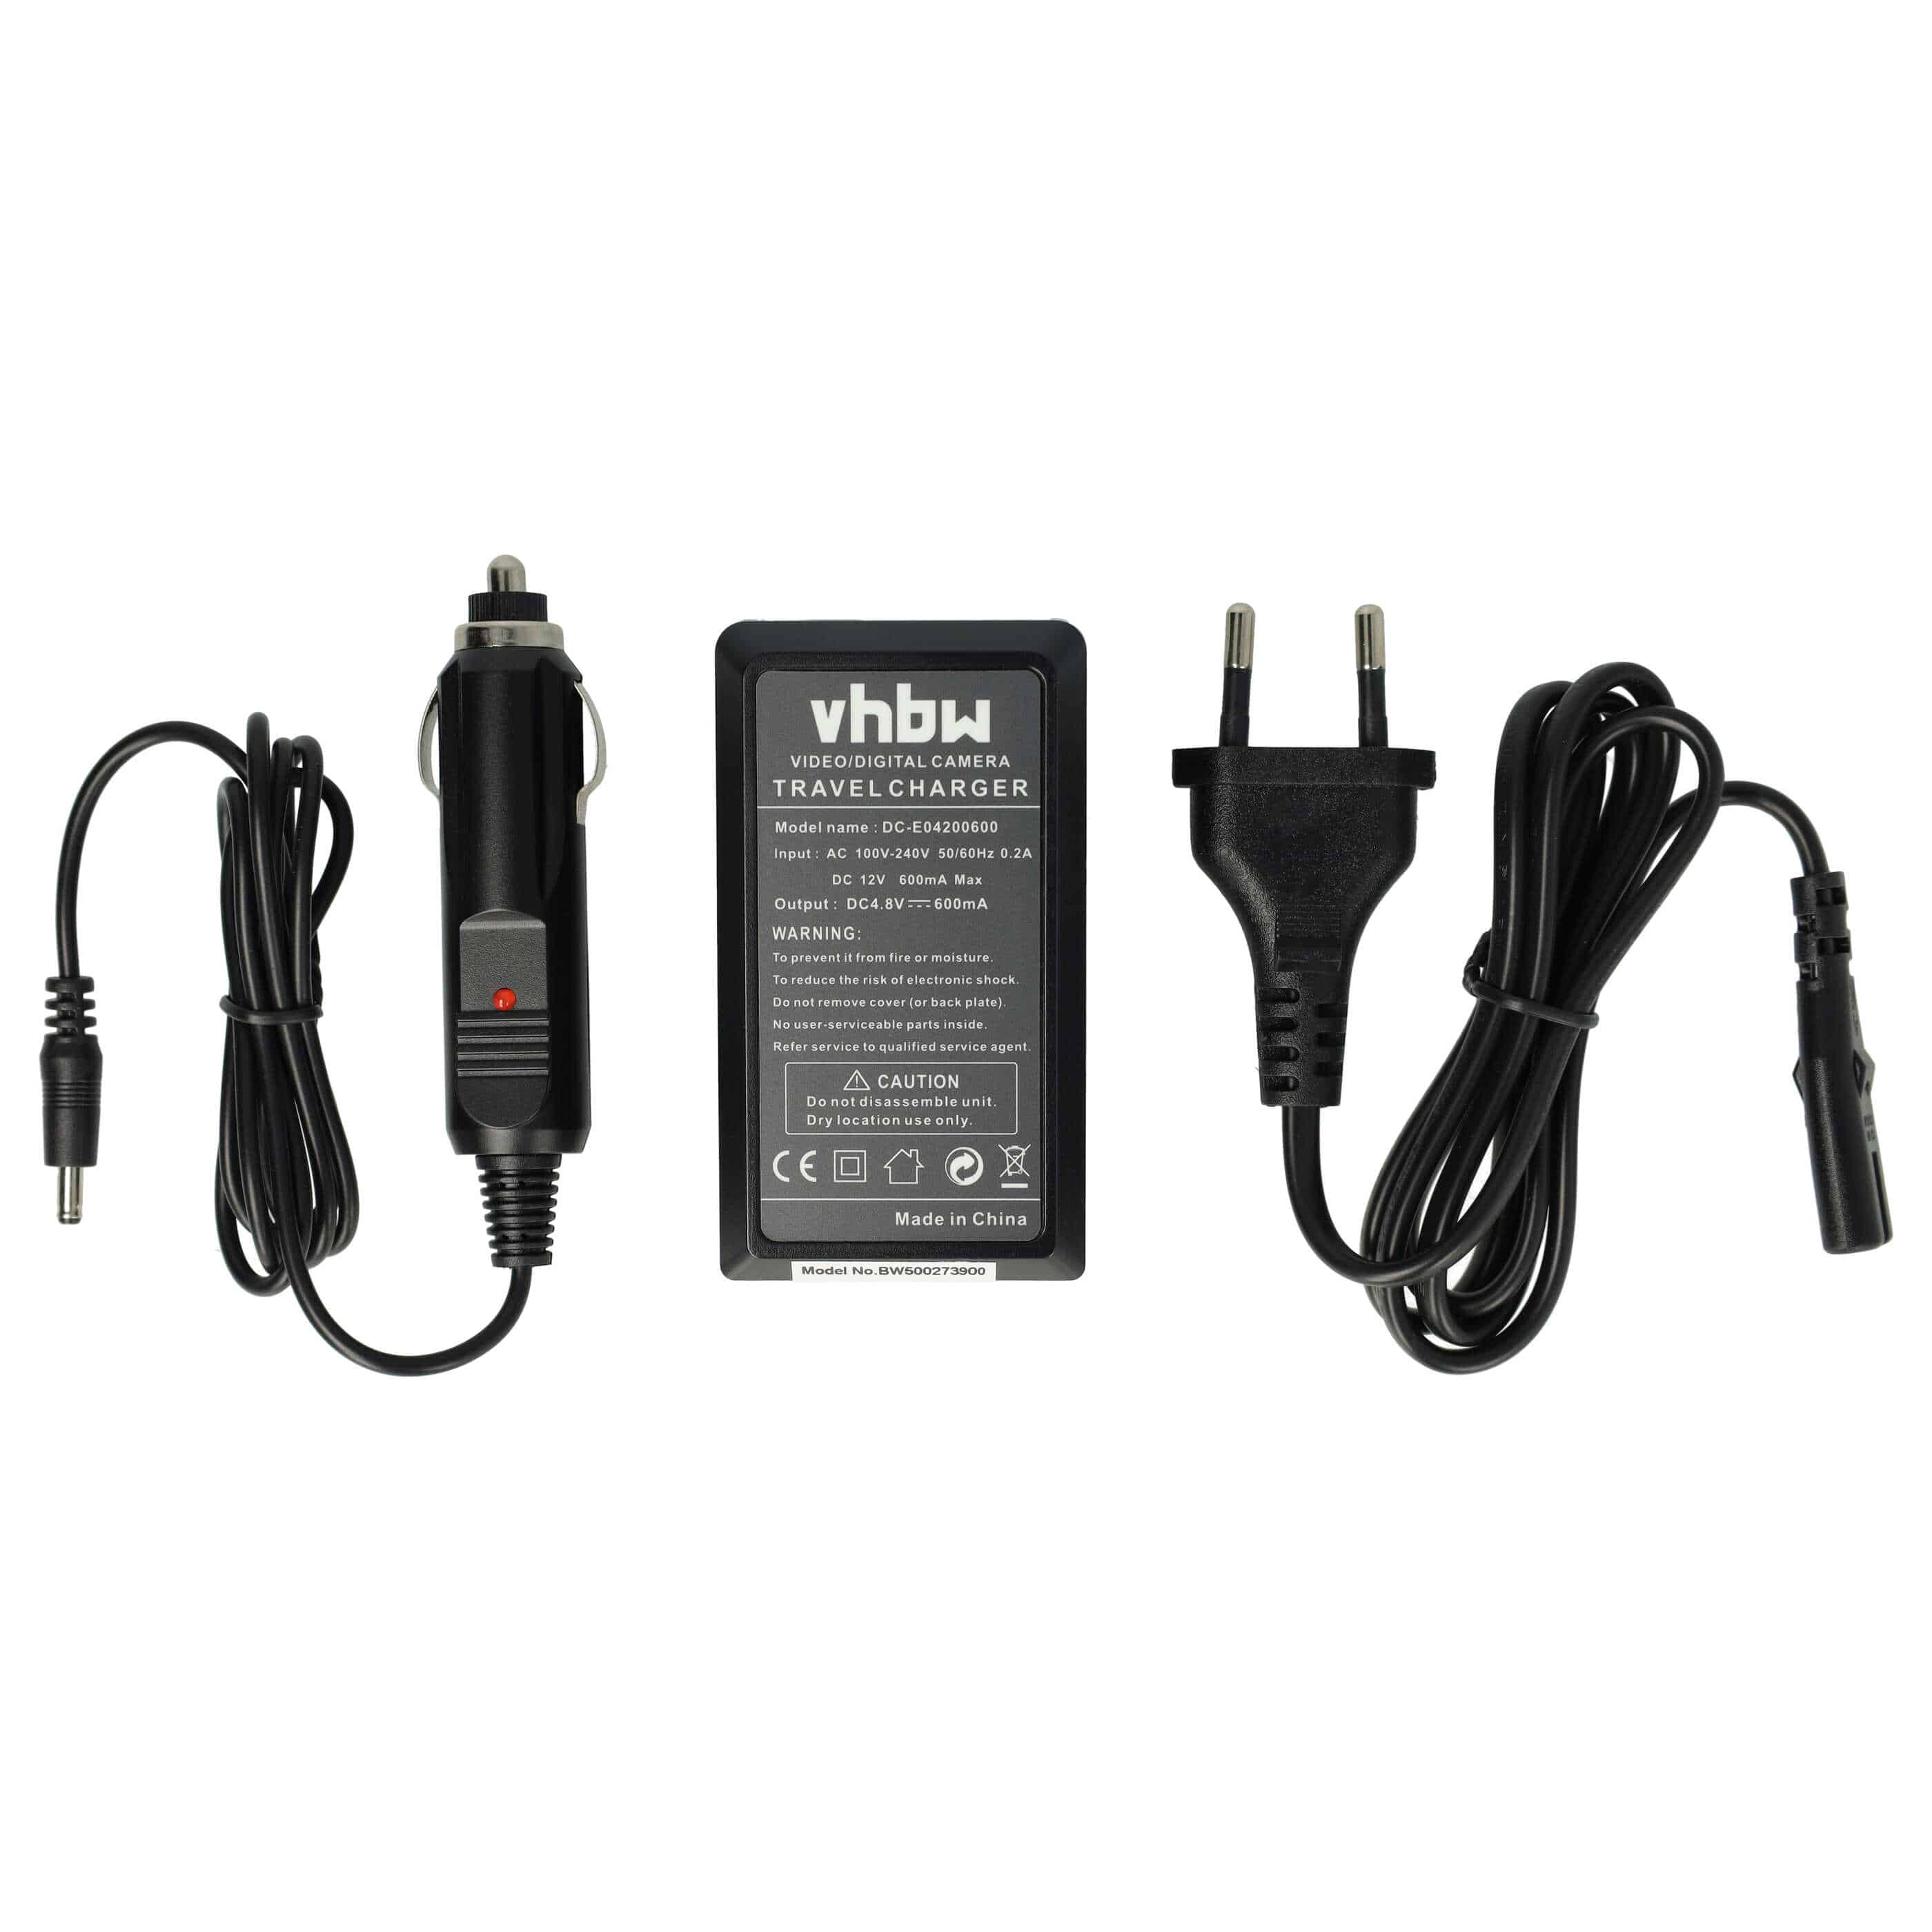 Battery Charger suitable for Toshiba Digital Camera - 0.6 A, 4.8 V